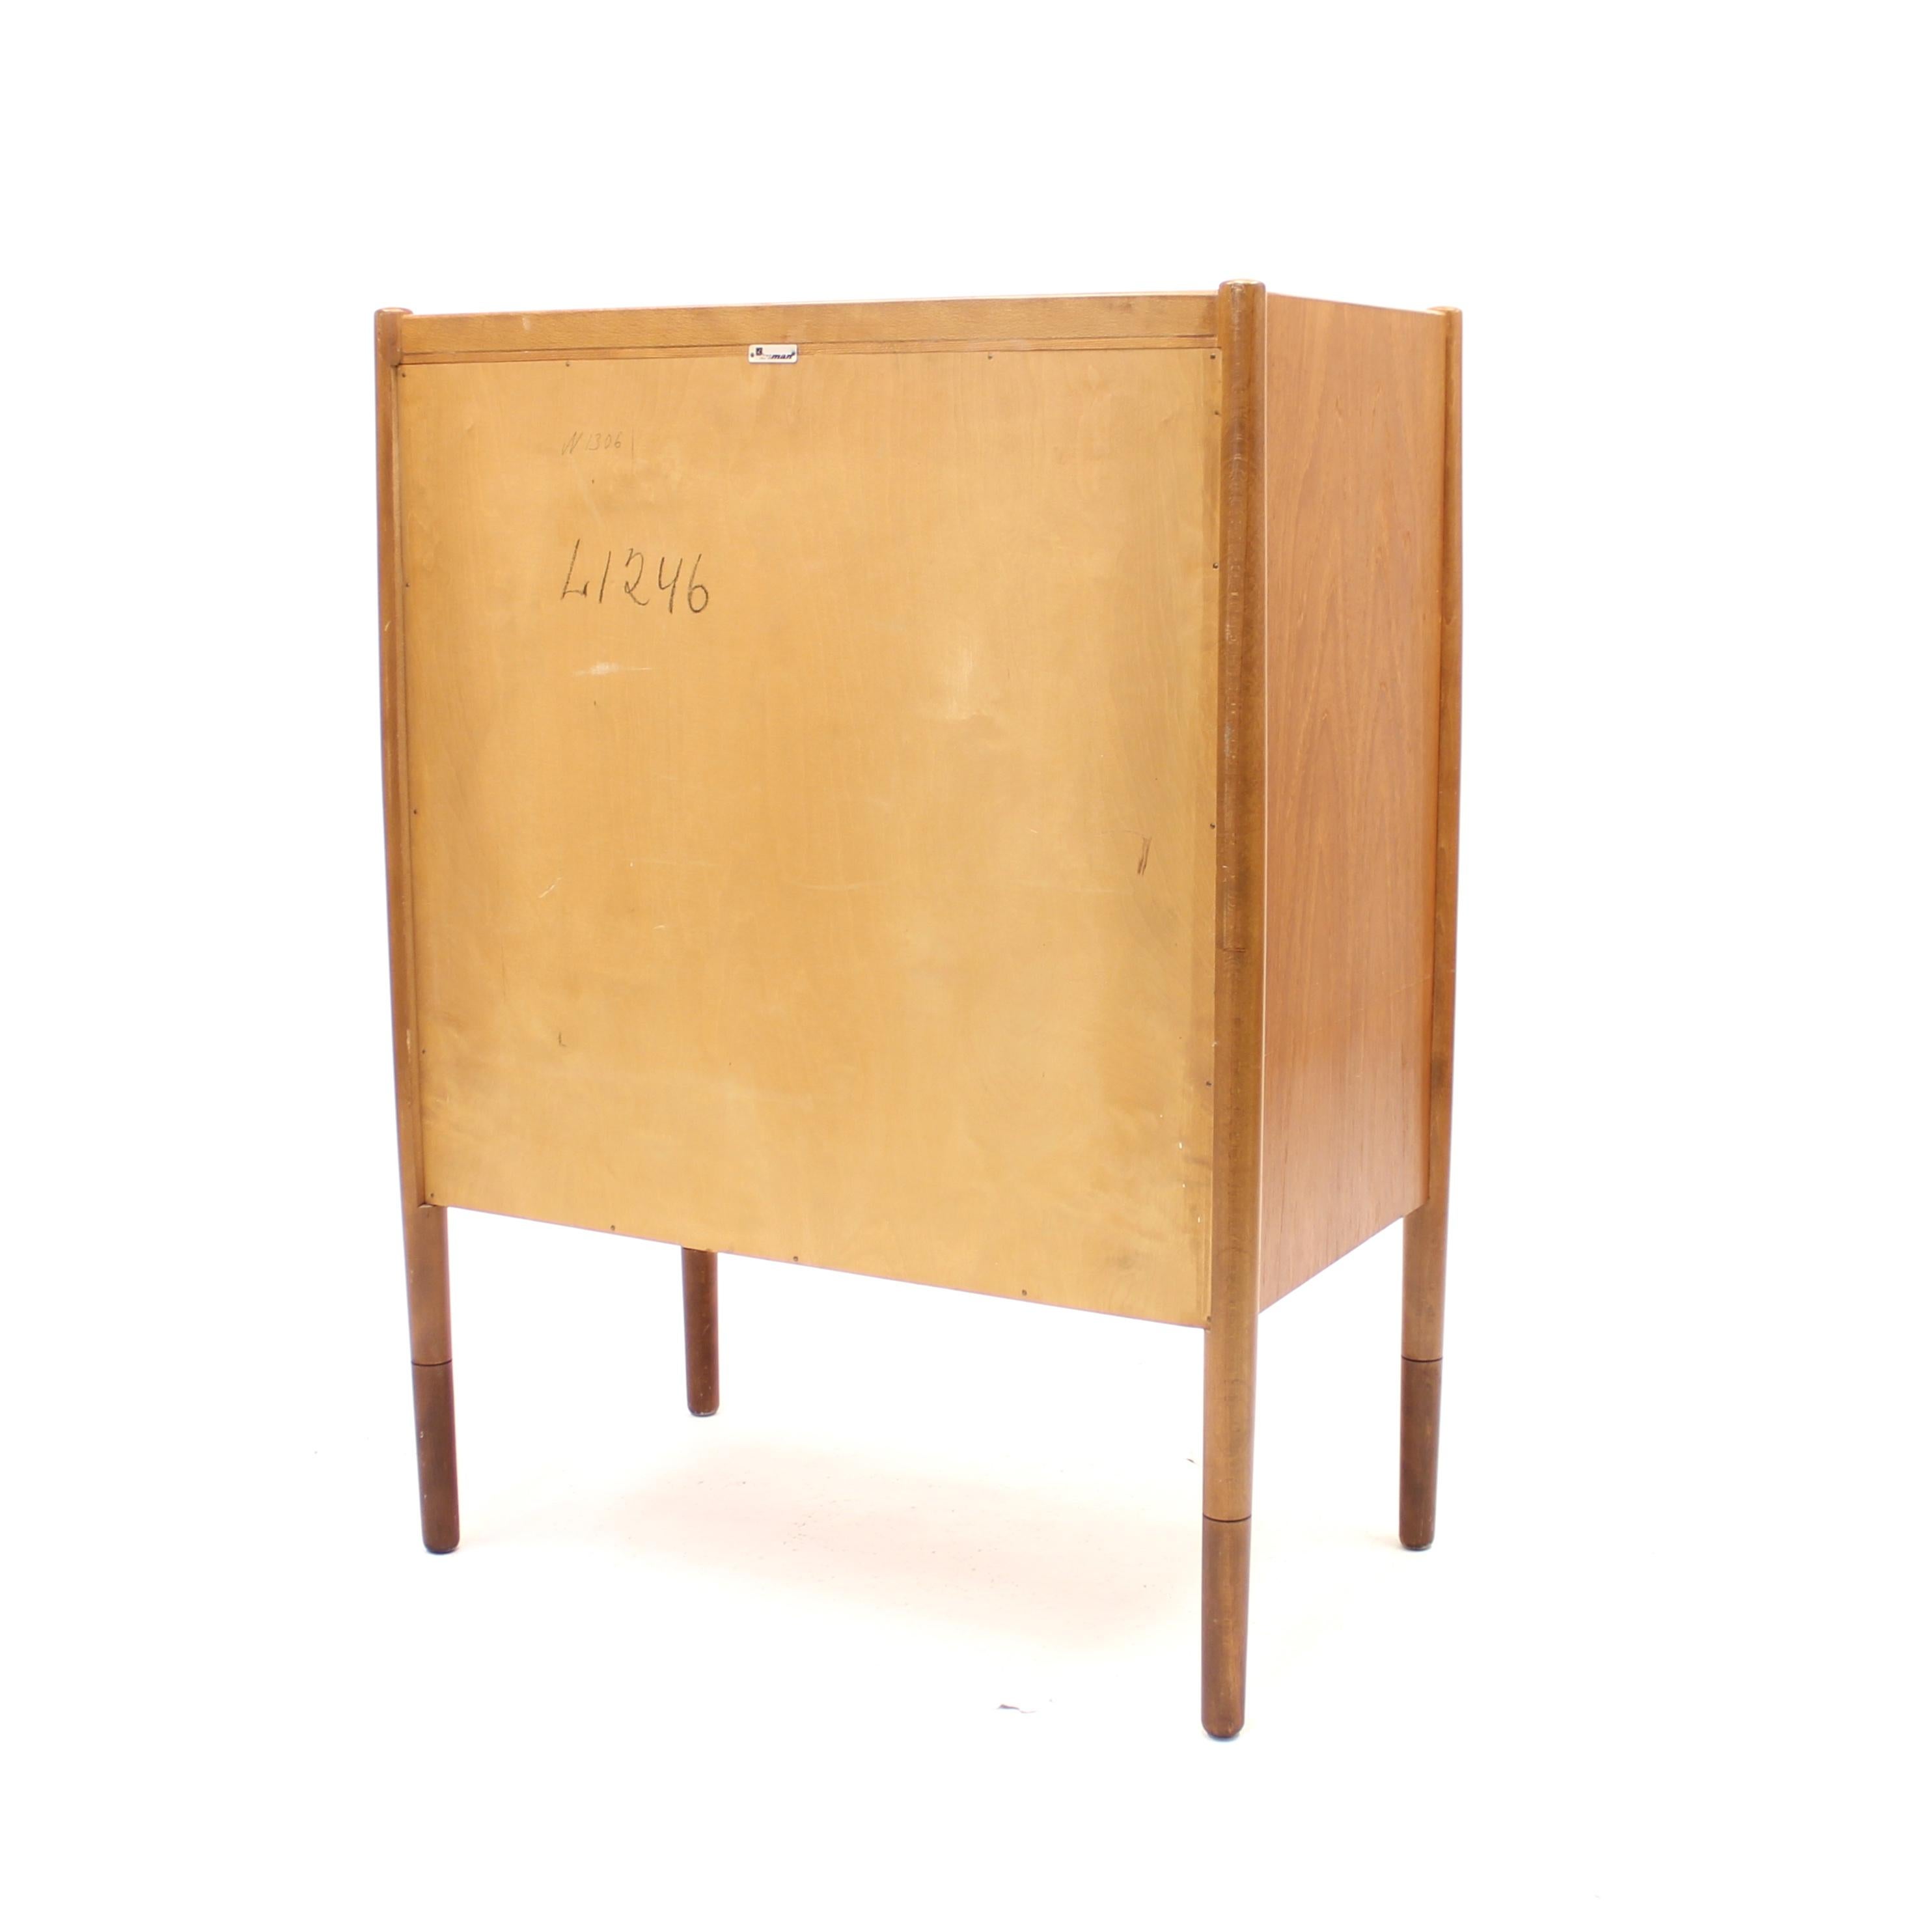 Swedish Mid-Century Teak Chest of Drawers by Treman, 1960s For Sale 3